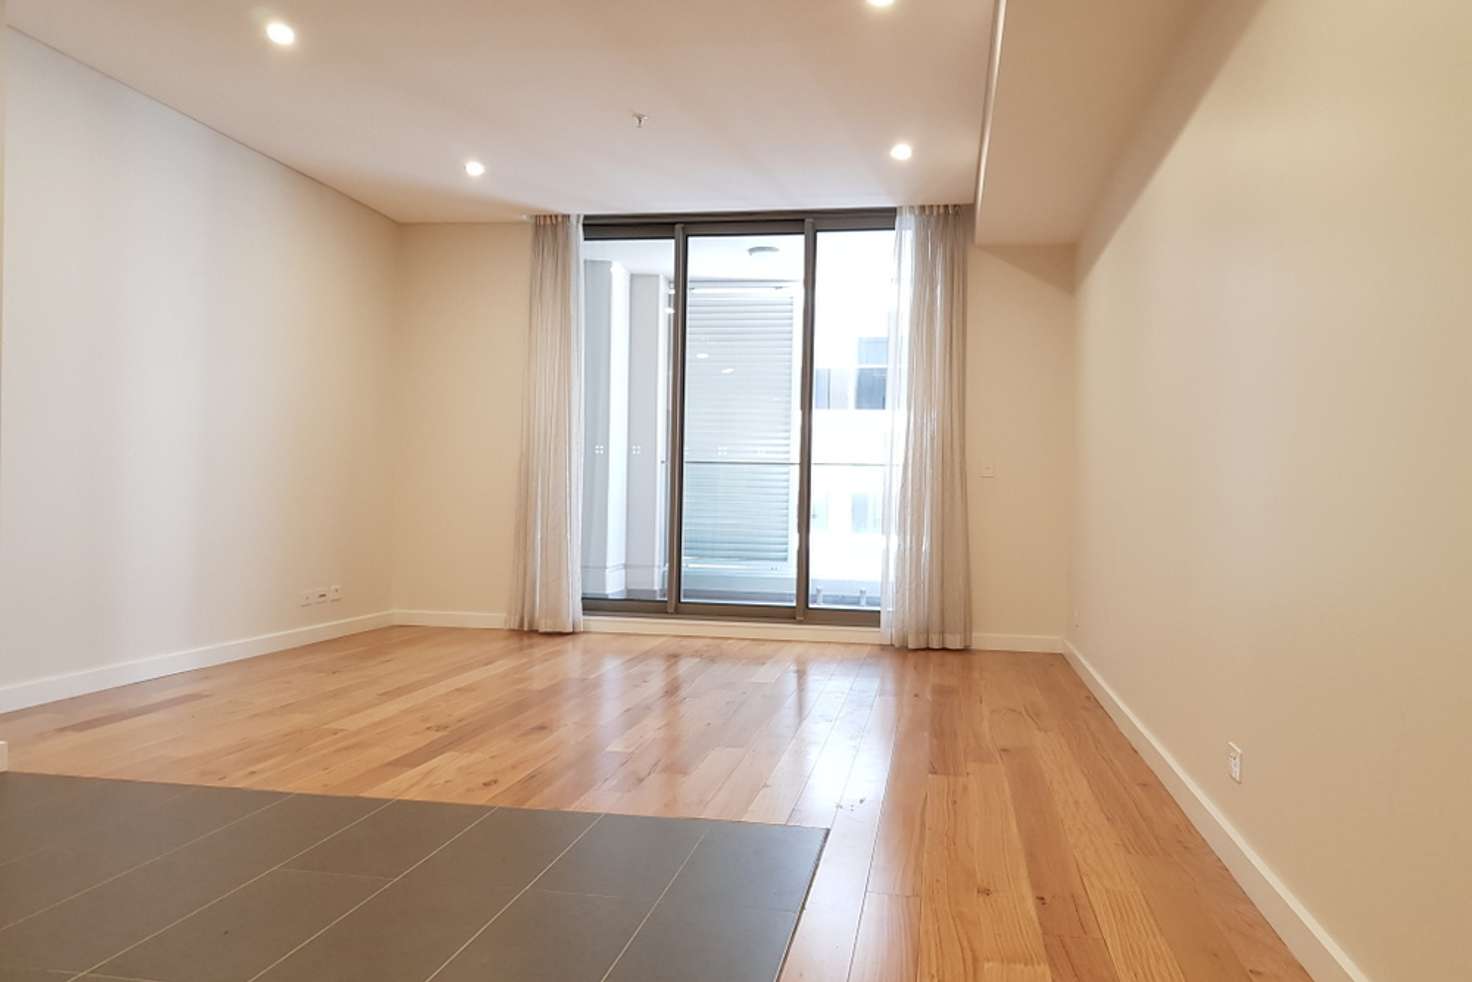 Main view of Homely apartment listing, 206/5 Atchison St, St Leonards NSW 2065